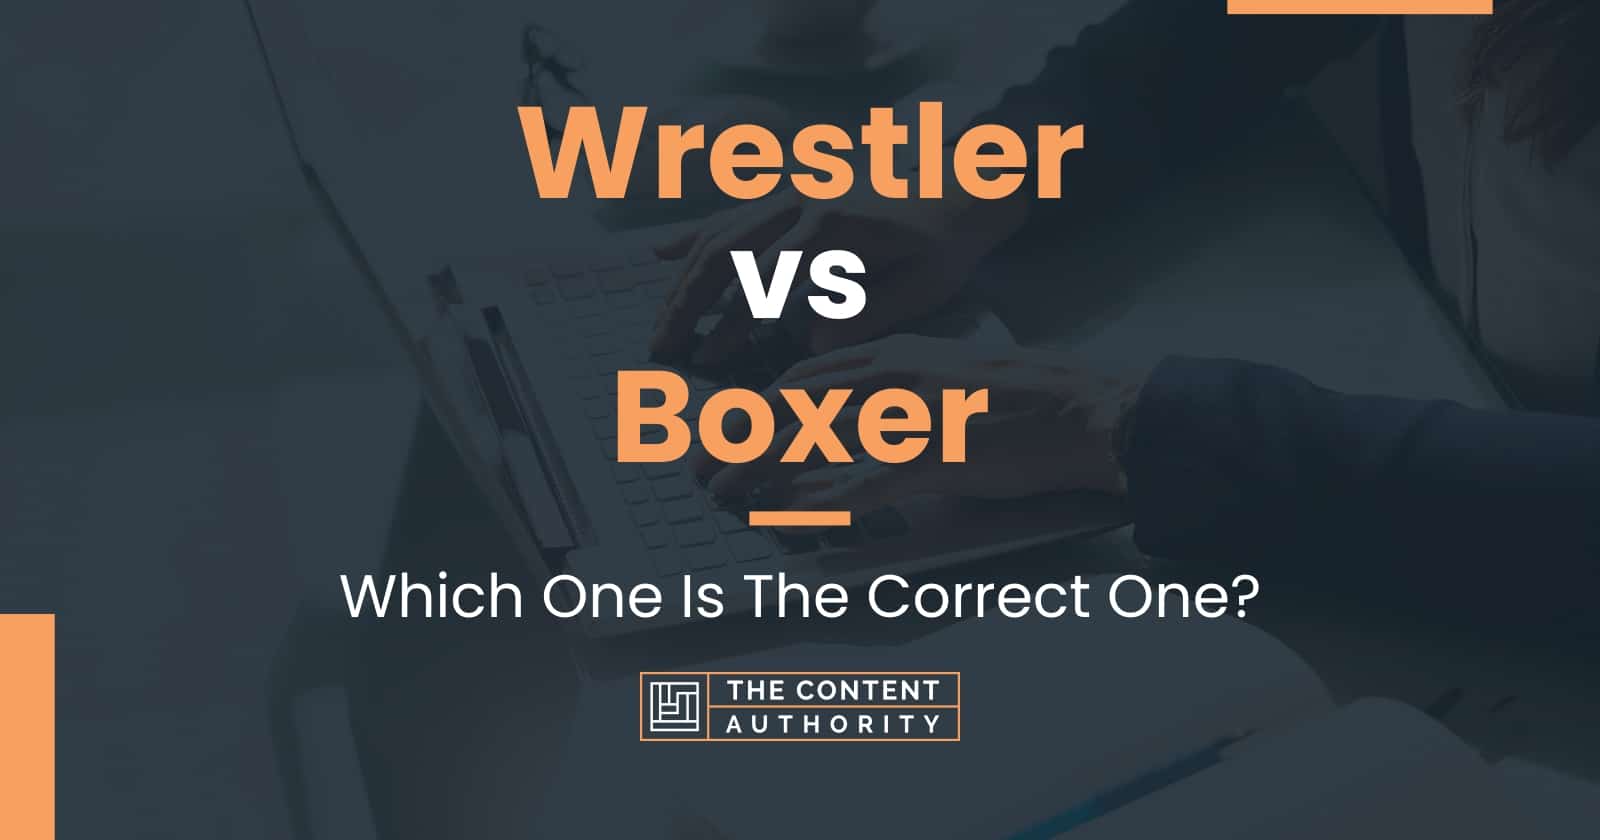 Wrestler vs Boxer: Which One Is The Correct One?